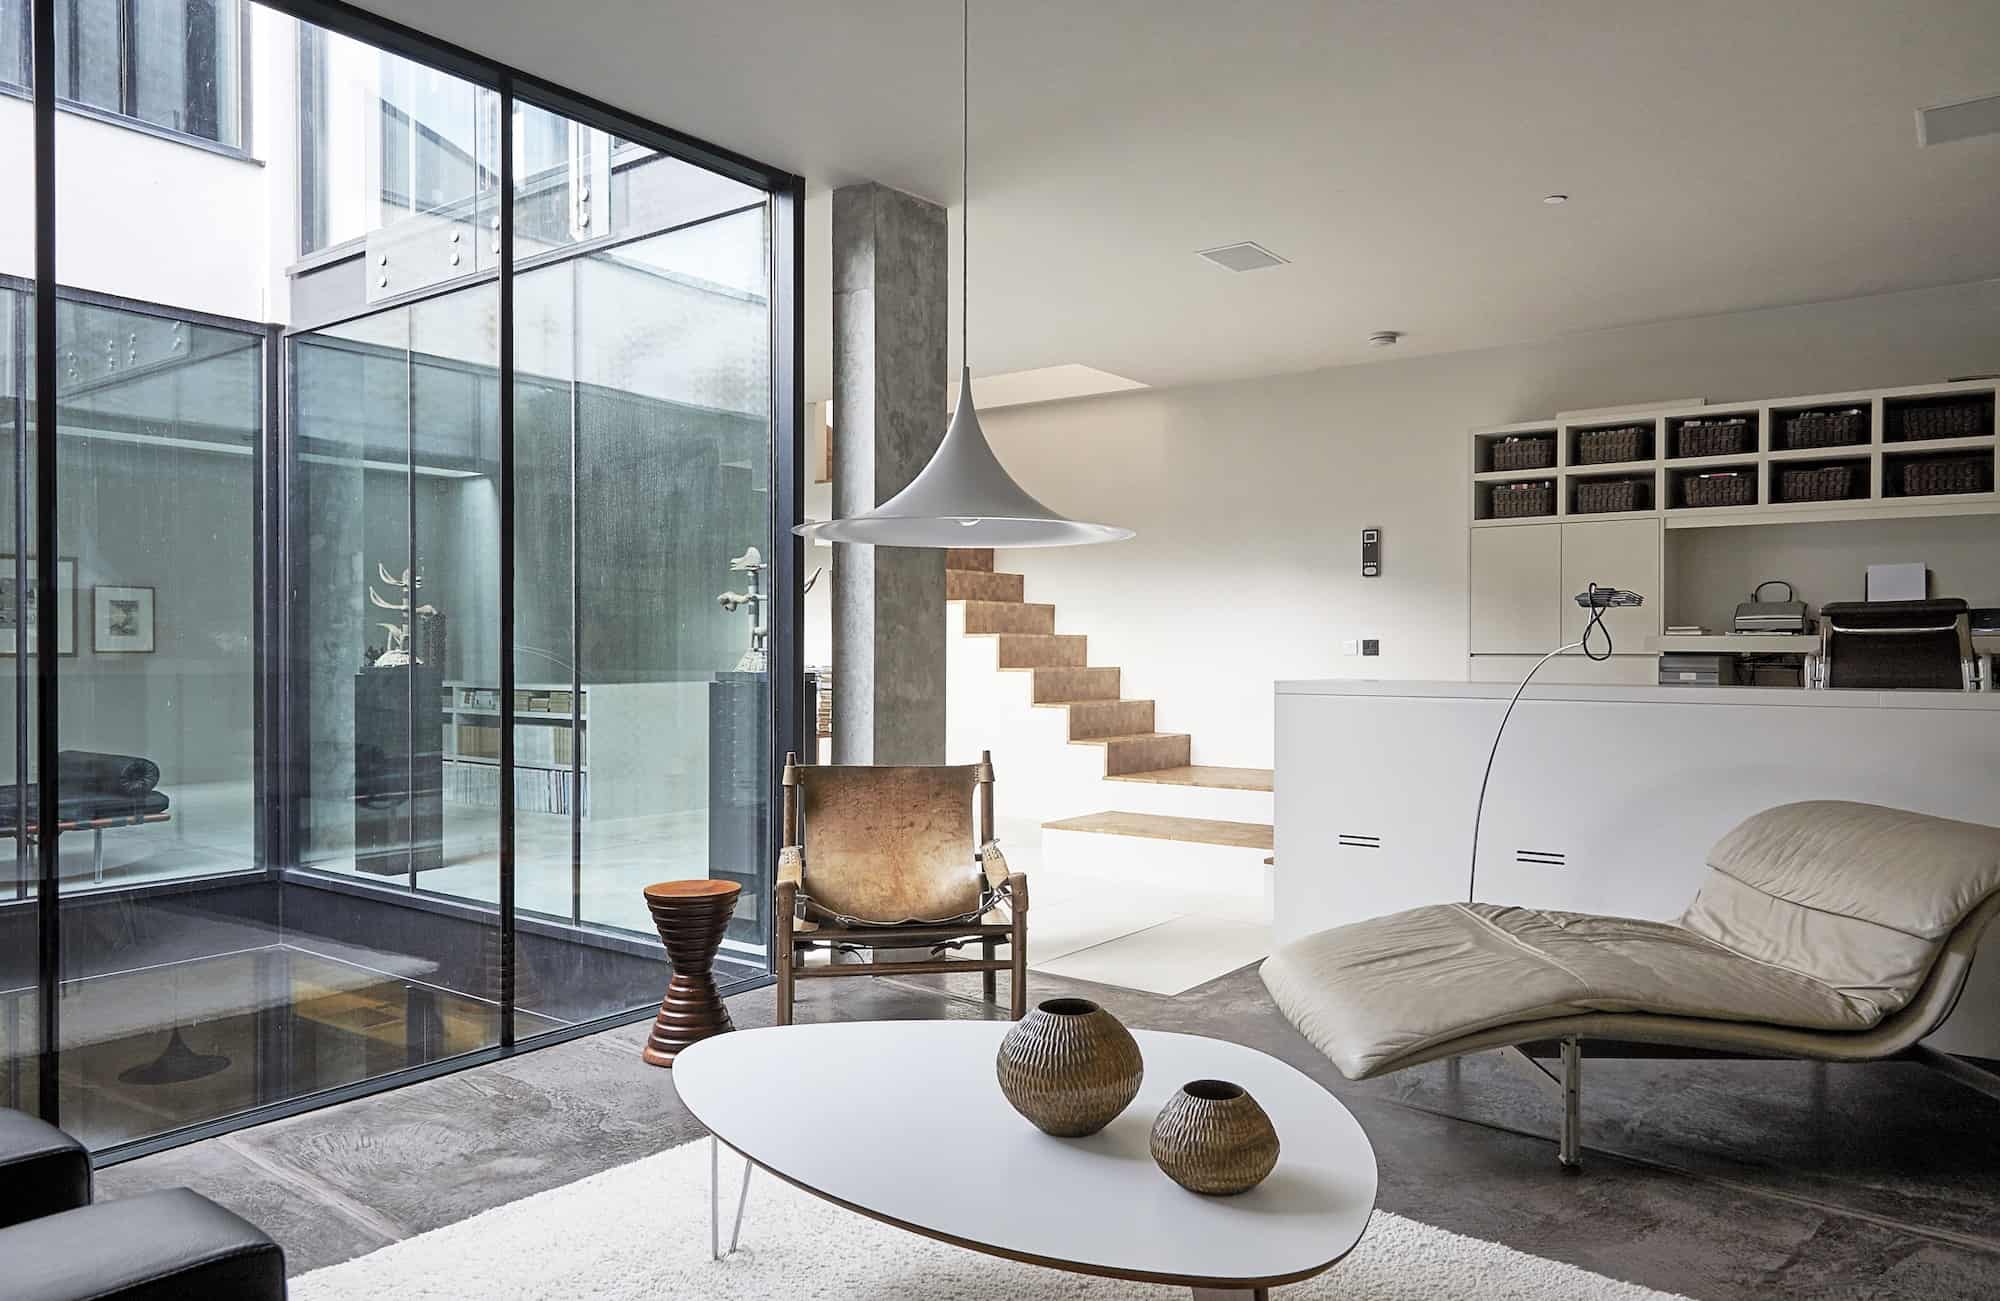 Shelter SW18 - A contemporary location house in London, built around a central courtyard with lots of glass, concrete and minimalist styling - The Location Guys